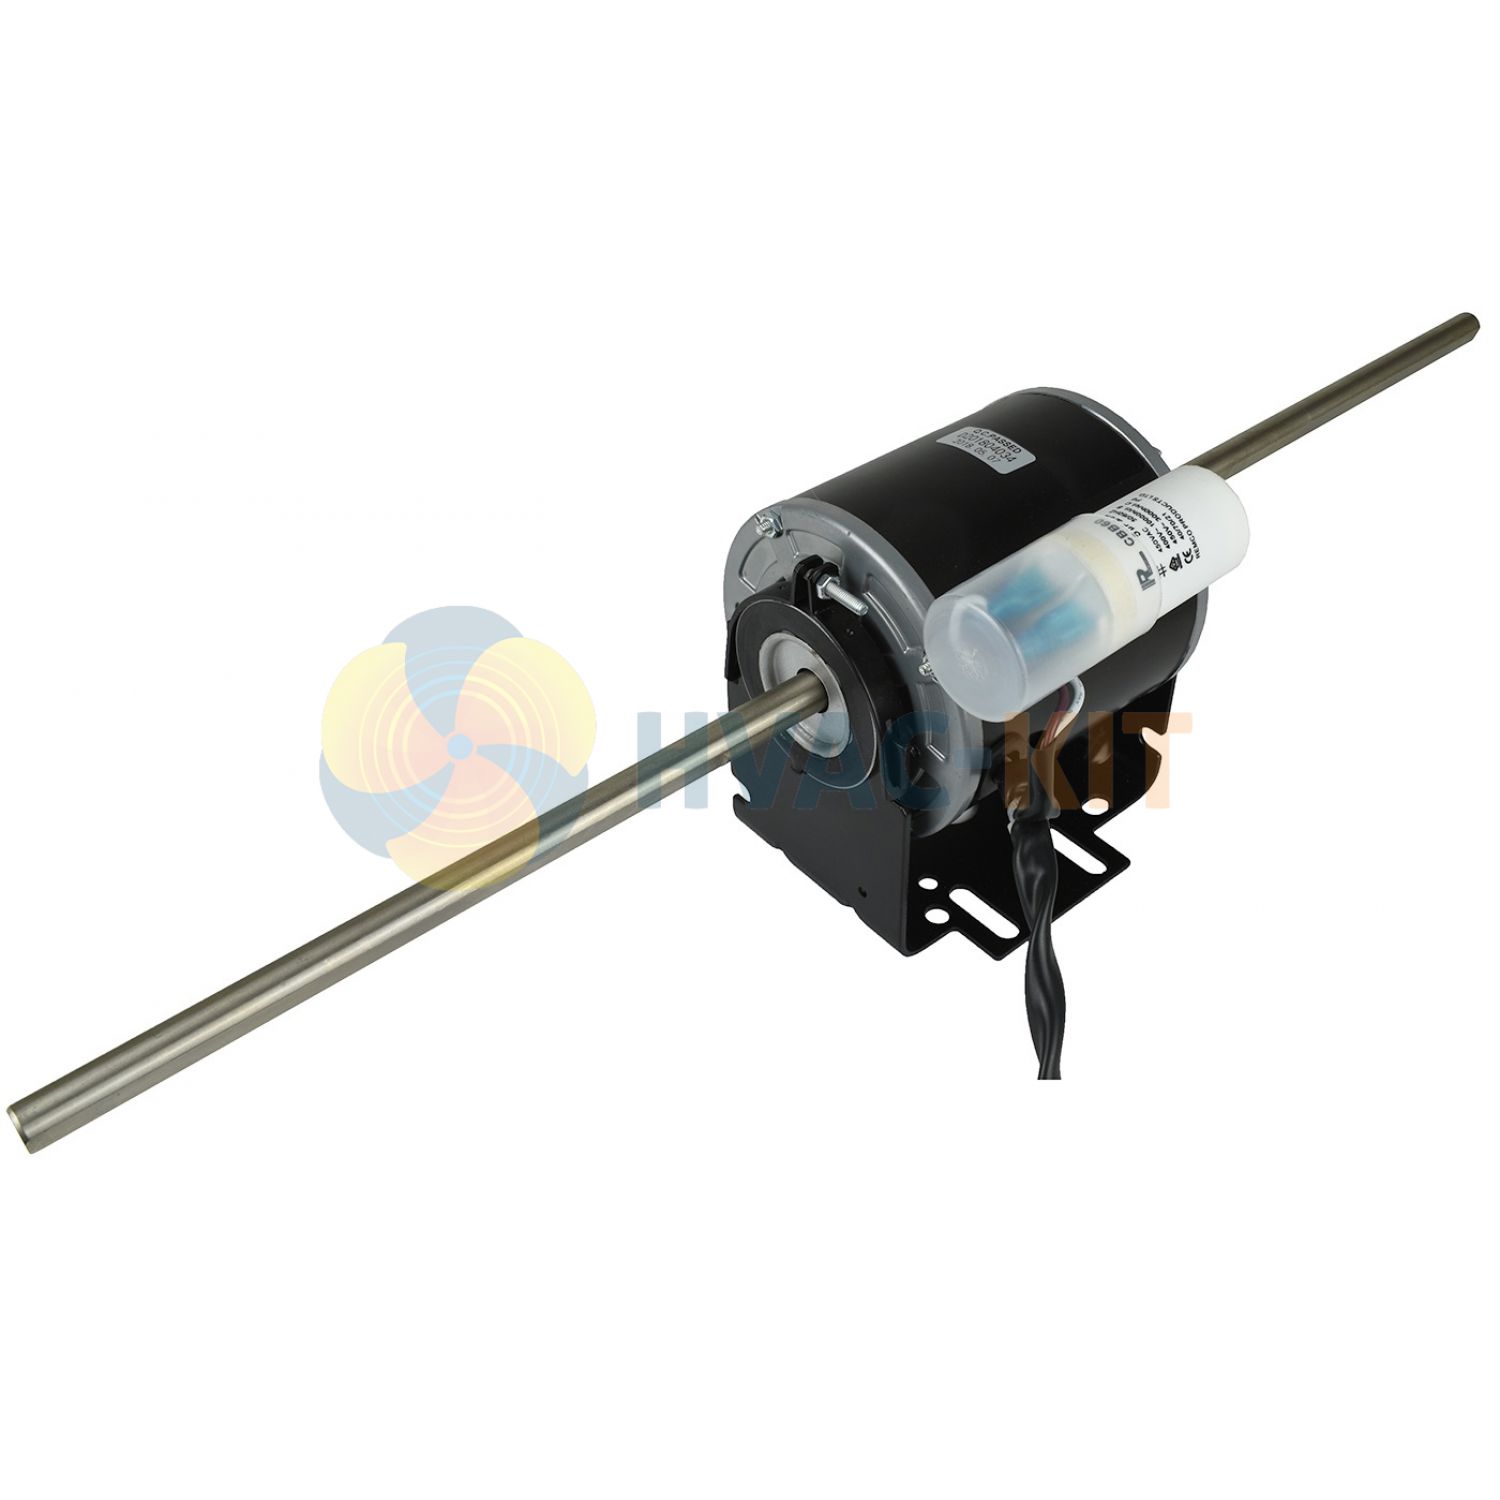 35-6-25/3DS1_4 Resilient Base Mount Motor